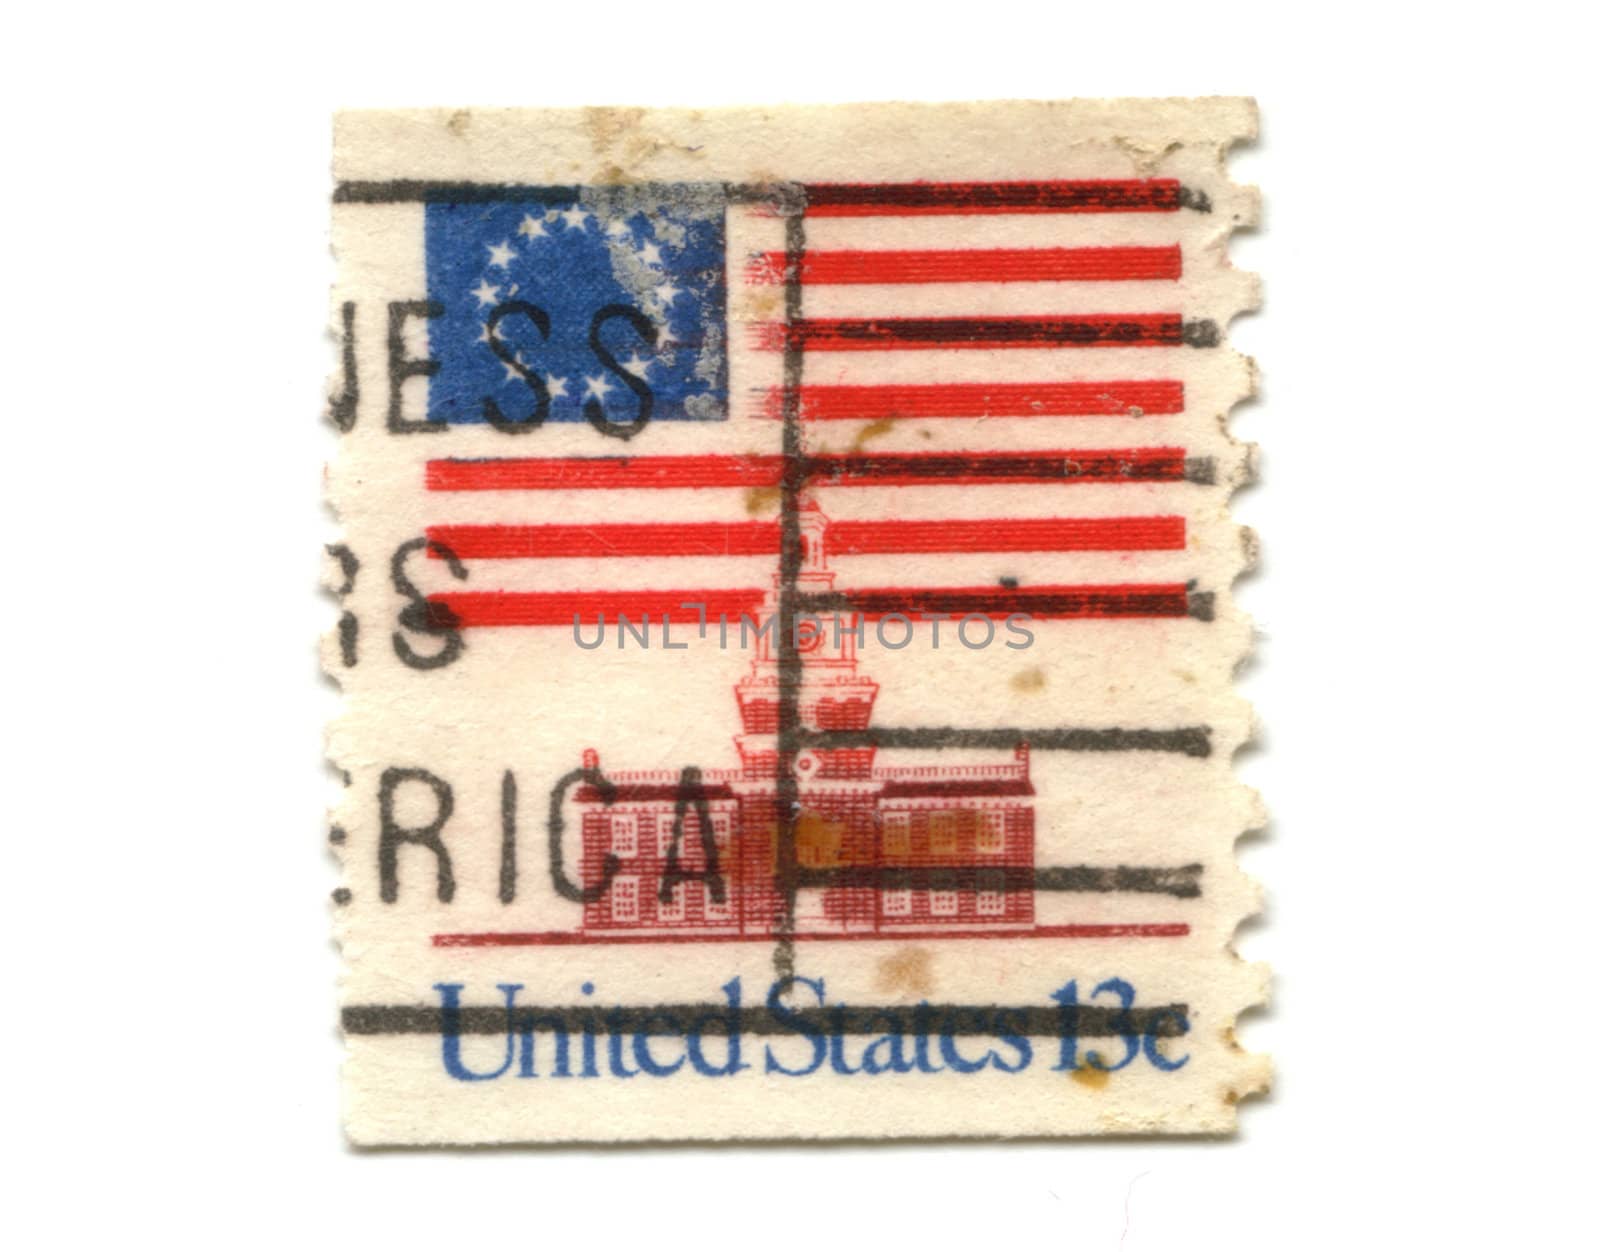 US postage stamp on white background 13c  by fambros